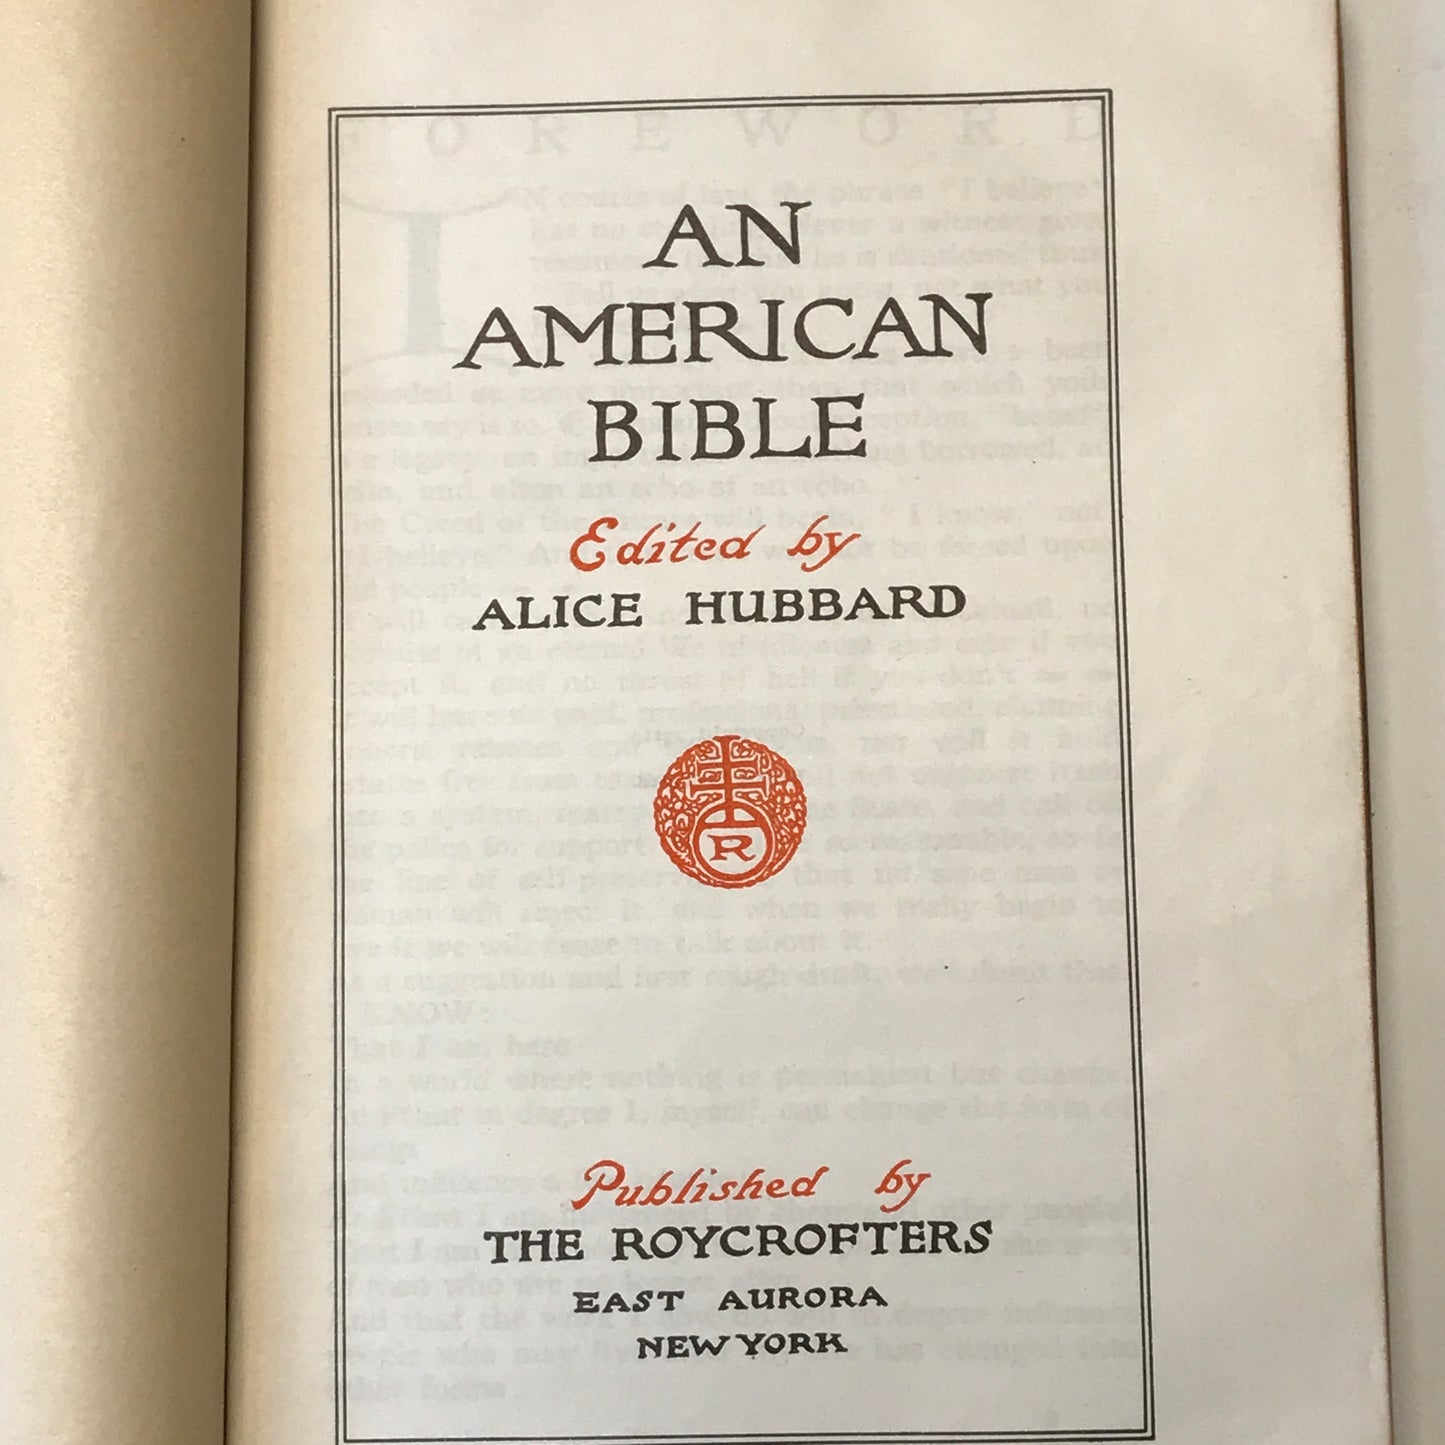 An American Bible - Alice and Elbert Hubbard - 1911 - Signed